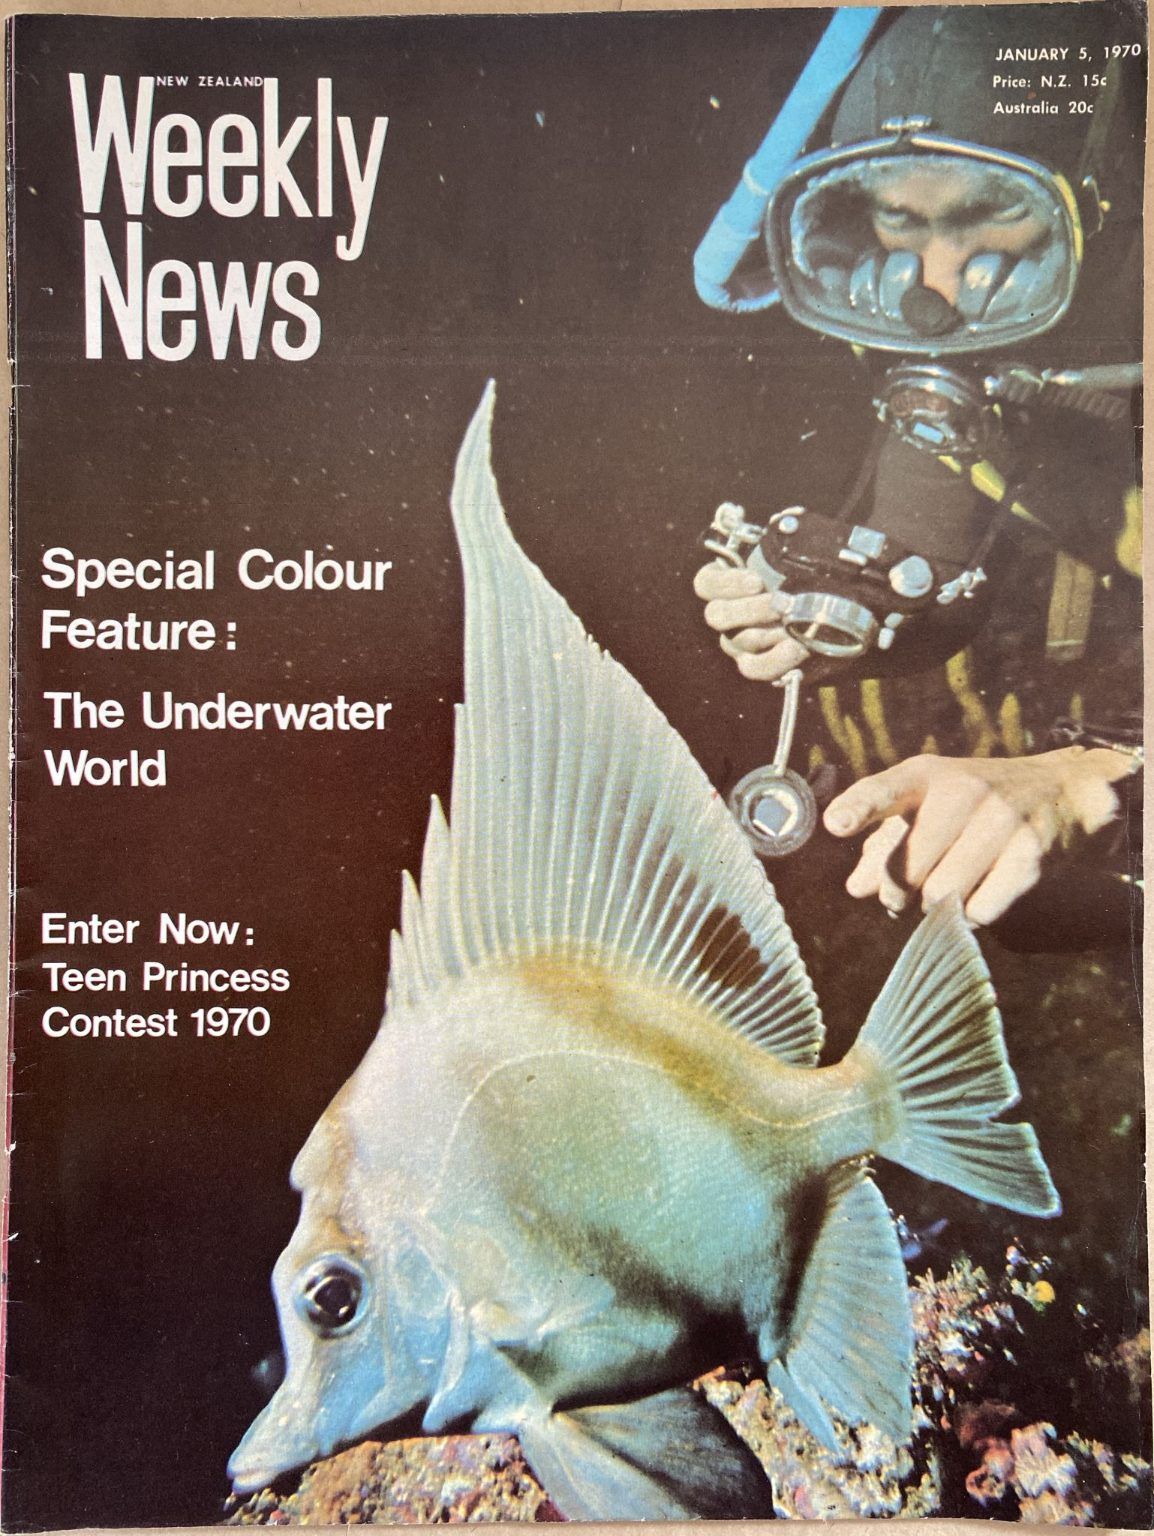 OLD NEWSPAPER: New Zealand Weekly News, No. 5536, 5 January 1970